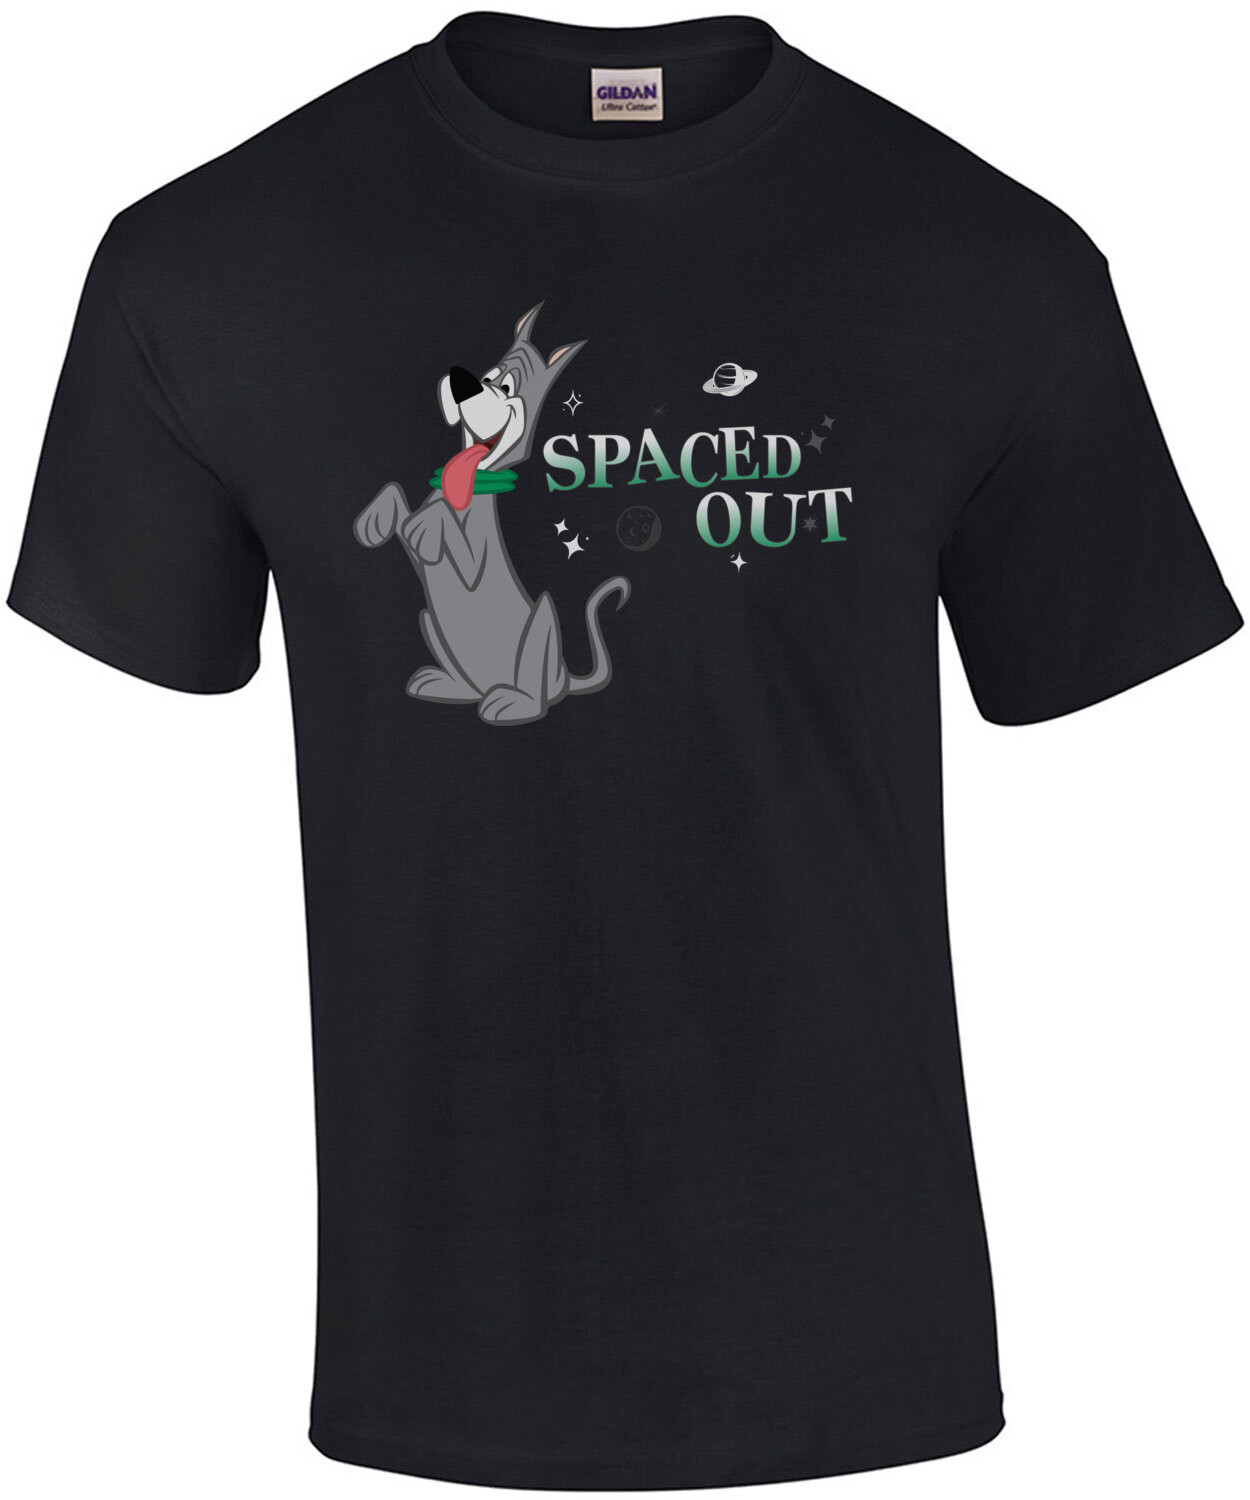 Spaced Out - Jetson's Dog Astro T-Shirt